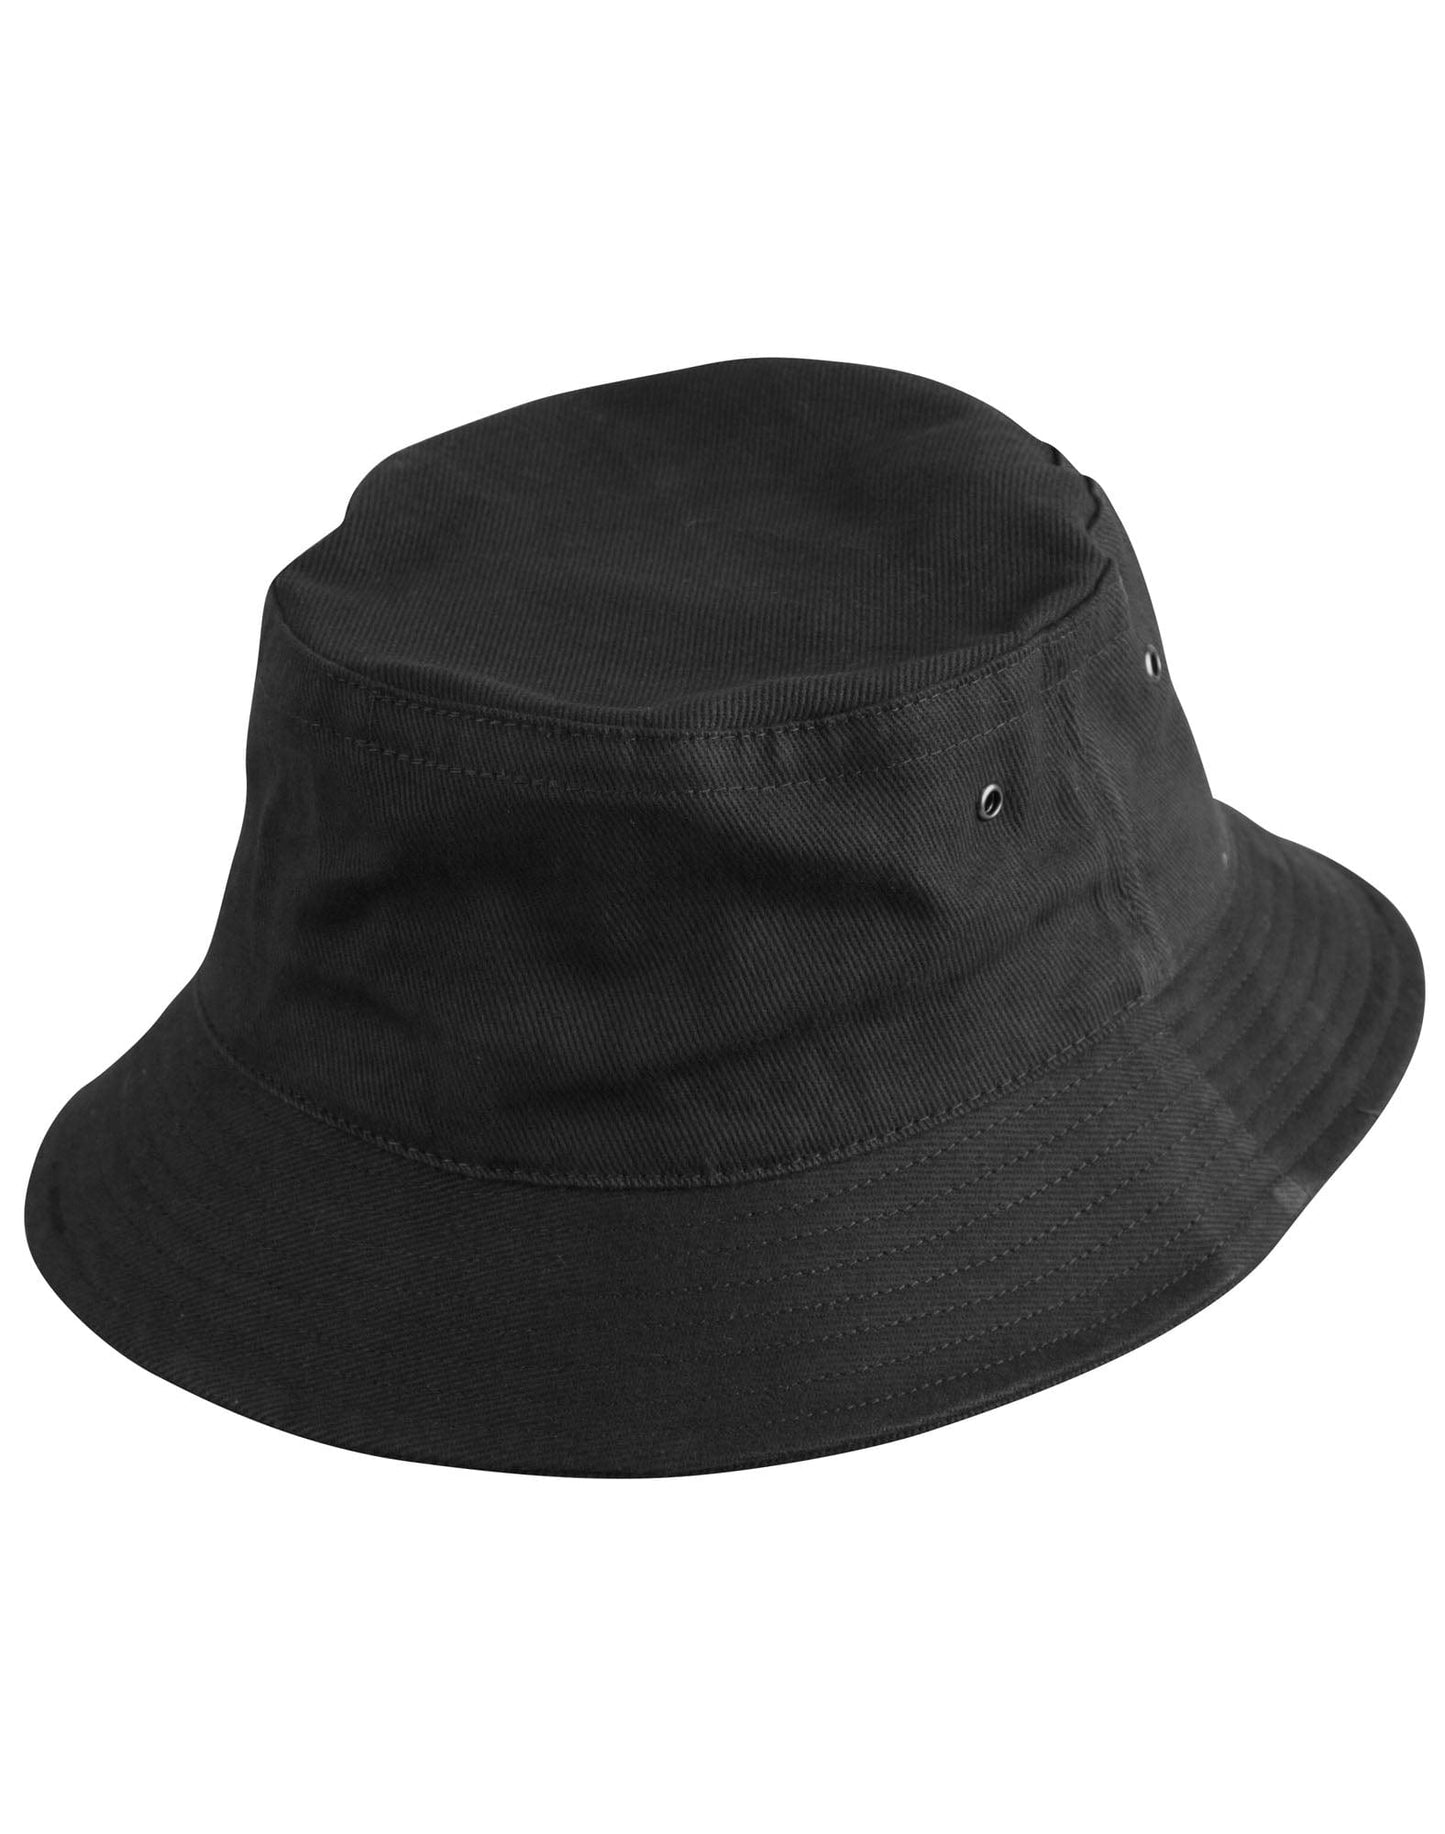 Aboriginal Soft Cotton Bucket Hat 60,000 Years and Counting